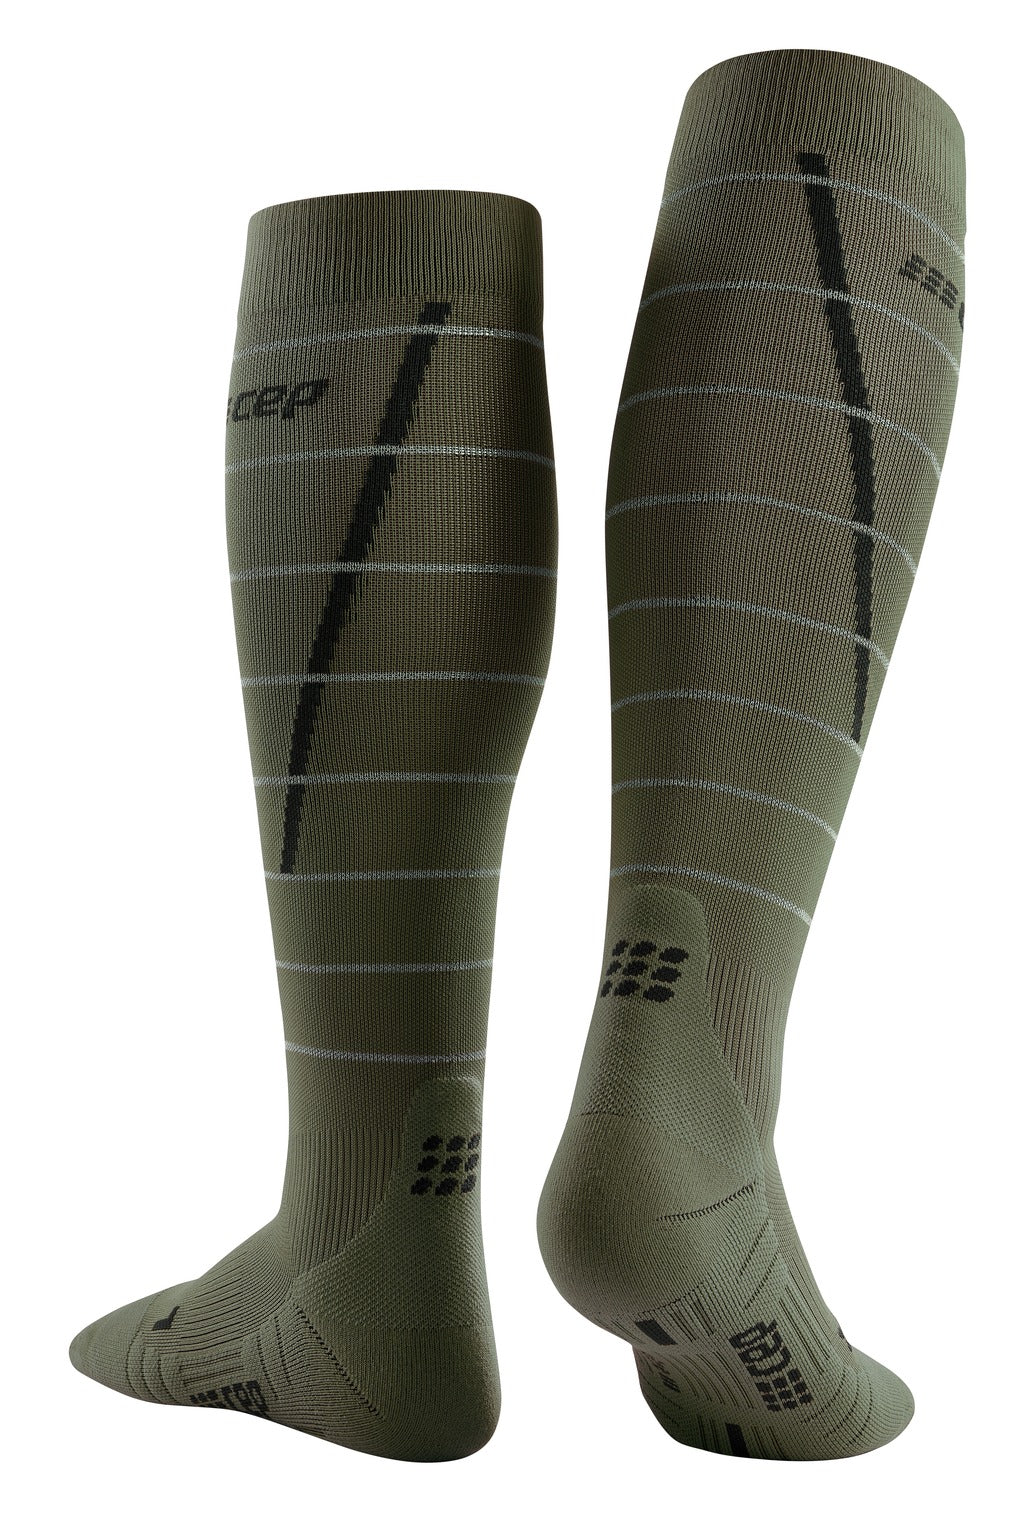 Extreme Fit Reflective Knee High Compression Socks Pair, Back